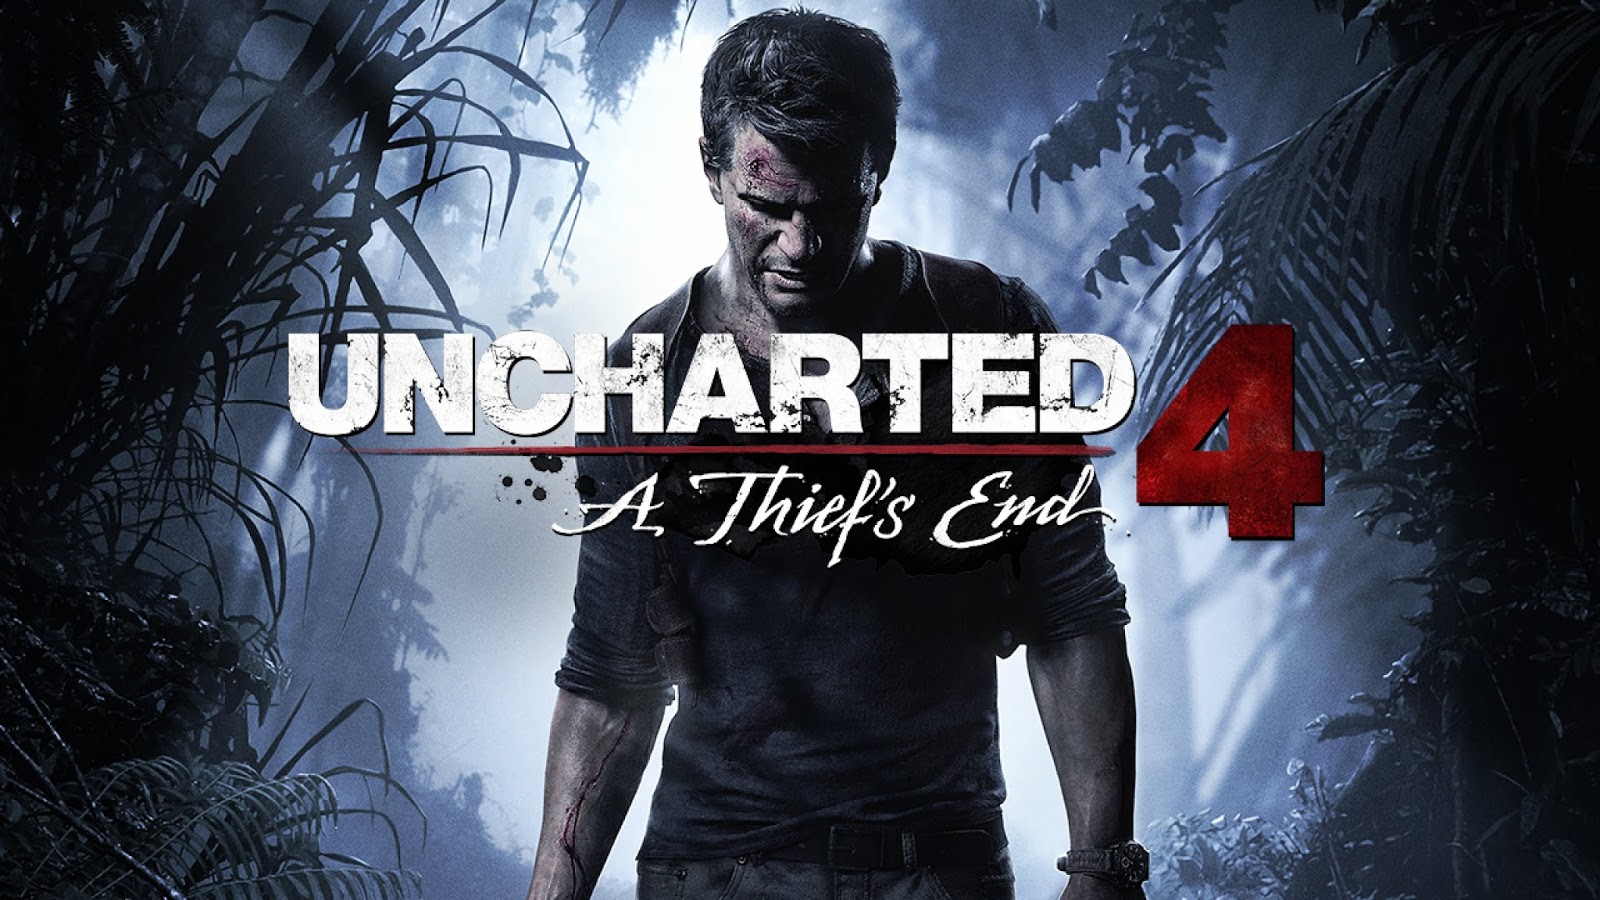 Uncharted 4 Fans Will Have Arguments About the Ending – Naughty Dog